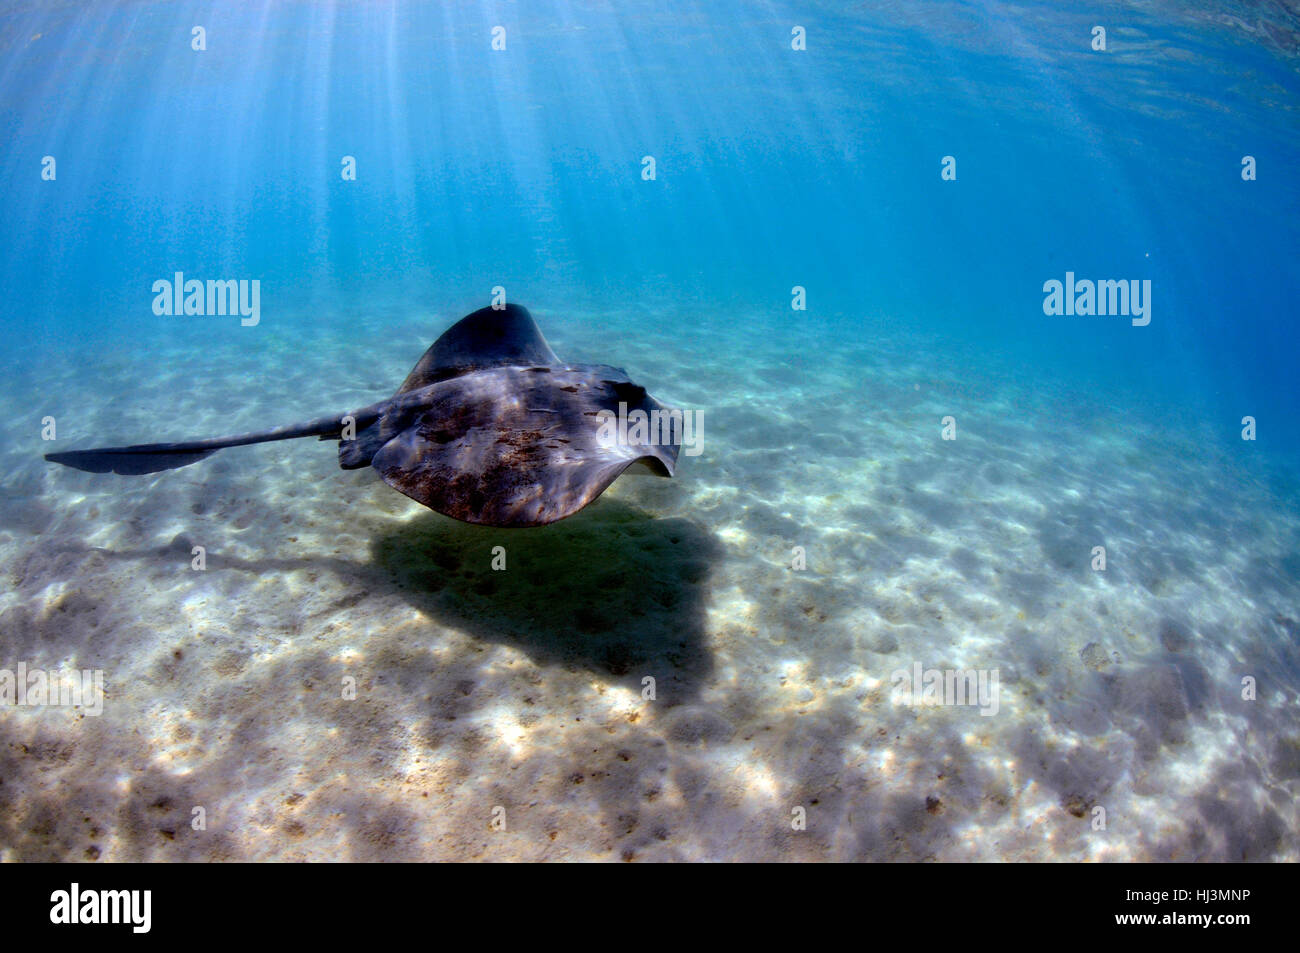 Cowtail stingray, Pastinachus sephen, swims in shallow waters off Shark Bay, Heron Island, Great Barrier Reef, Queensland, Australia Stock Photo